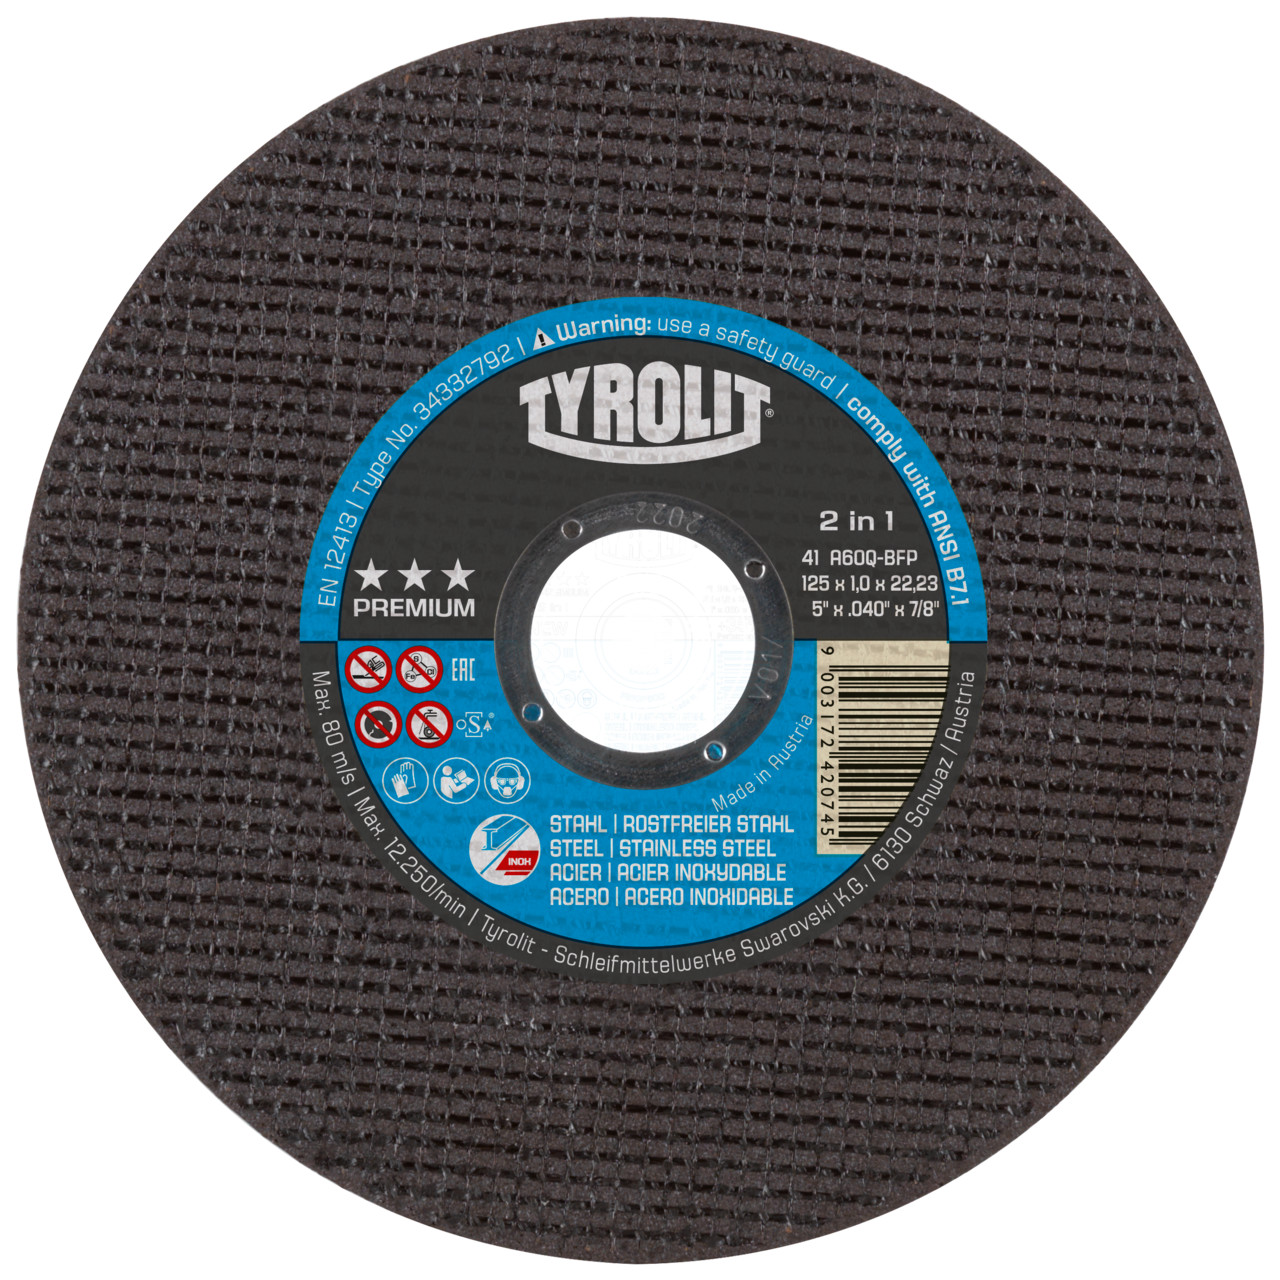 TYROLIT cut-off wheels DxDxH 115x2.5x22.23 2in1 for steel and stainless steel, shape: 41 - straight version, Art. 872338